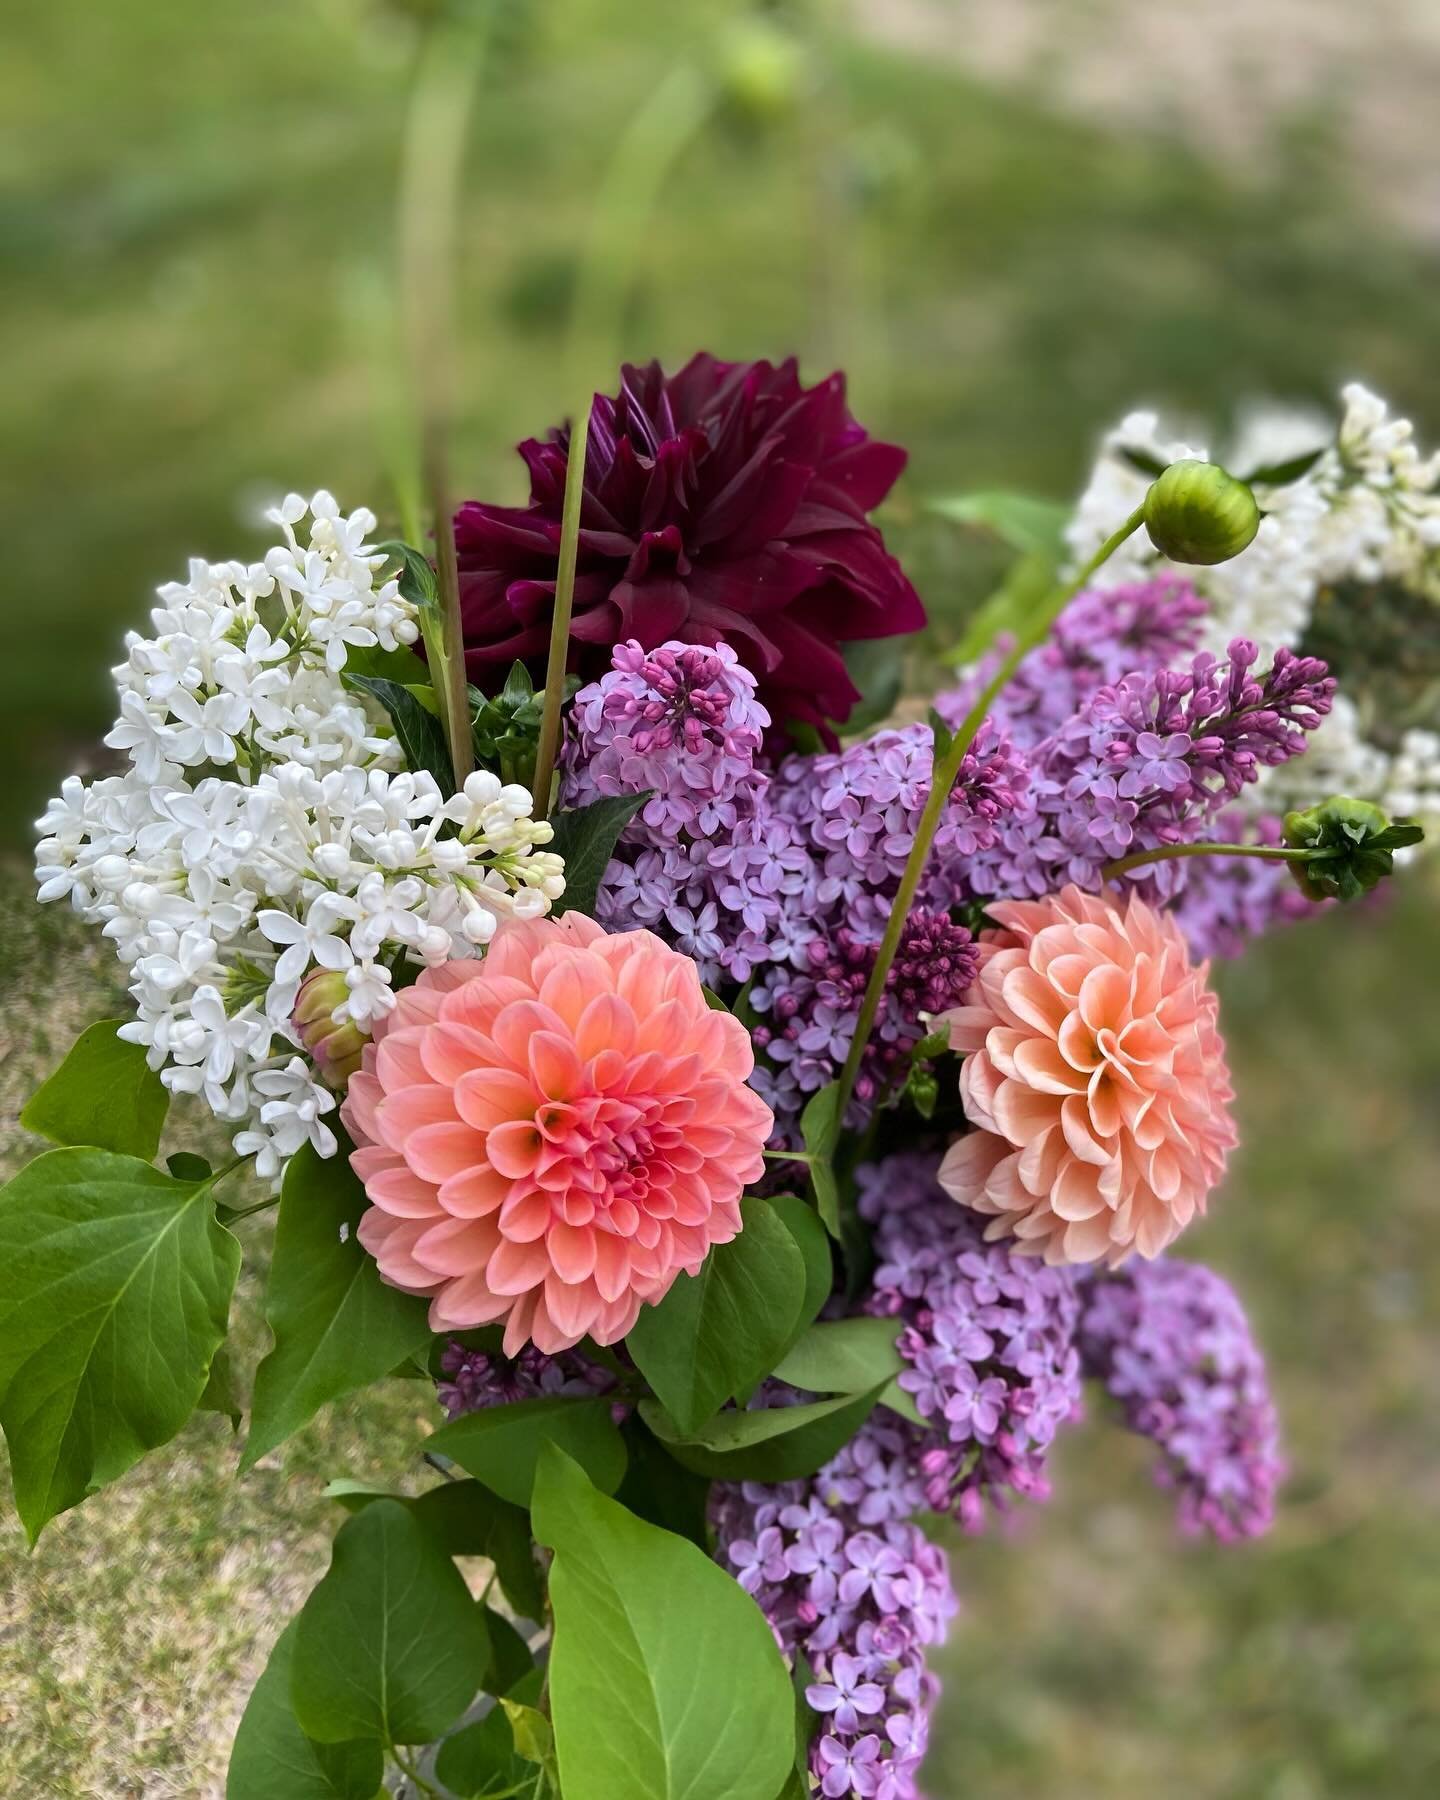 I&rsquo;m spoiled! When would you ever see this combination- anywhere?! Lilacs aren&rsquo;t a good florist flower and they bloom April May, the opposite time from dahlias in August September. Sure is beautiful though!